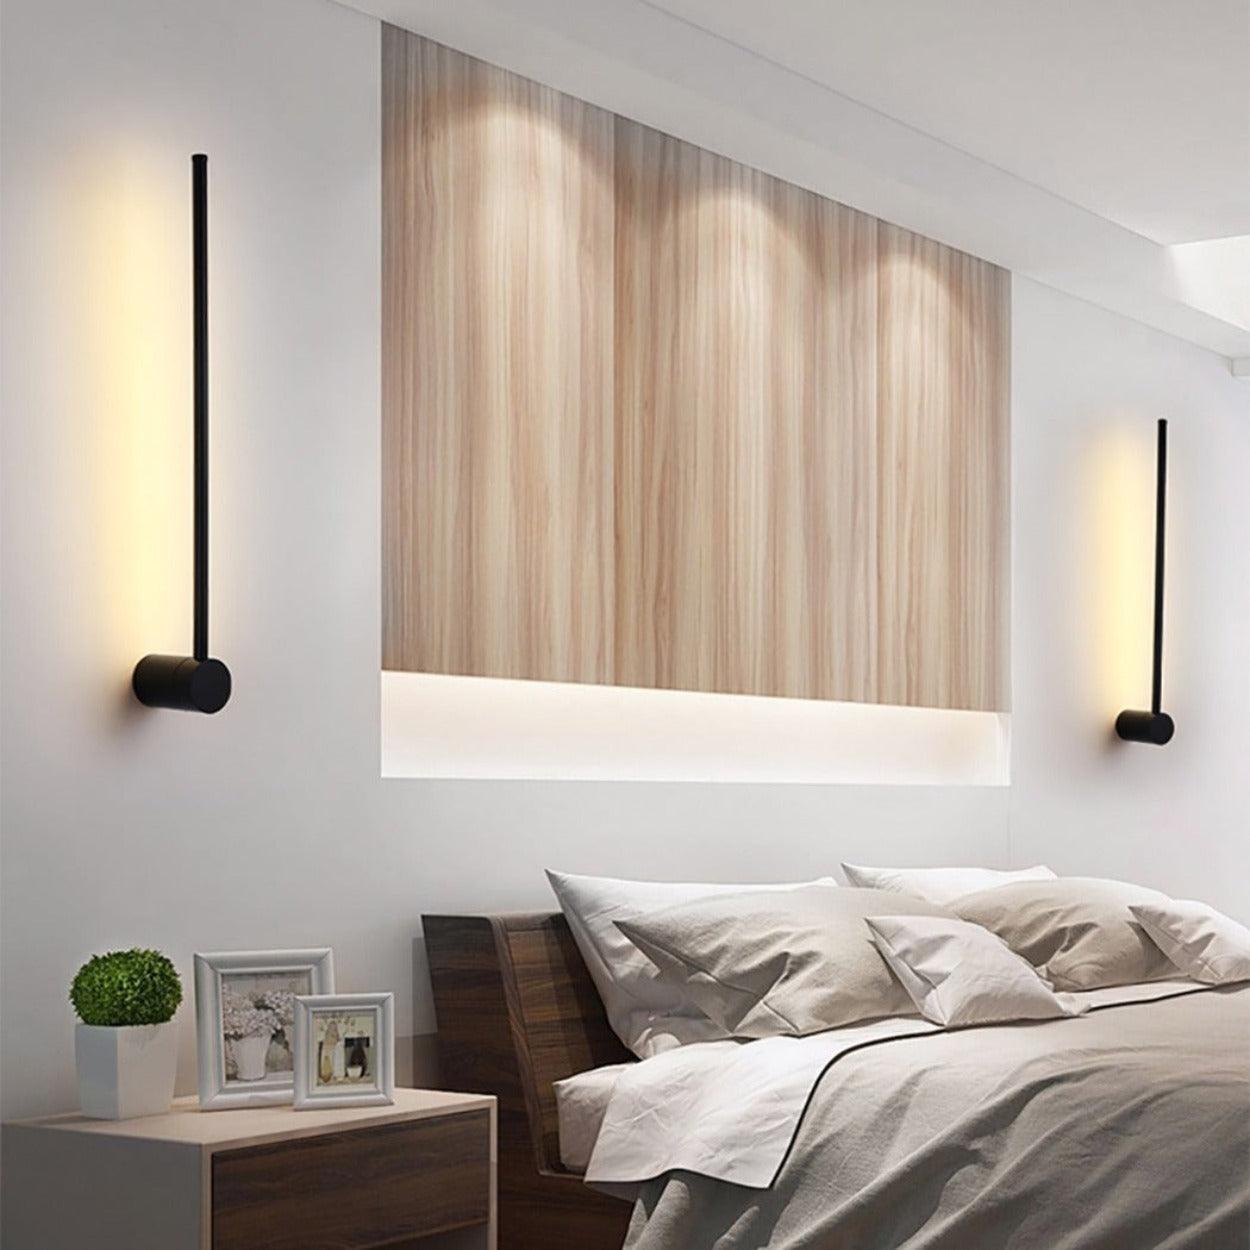 ANKUR ELLIS LINEAR CONTEMPORARY LED WALL LIGHT at the lowest price in India.